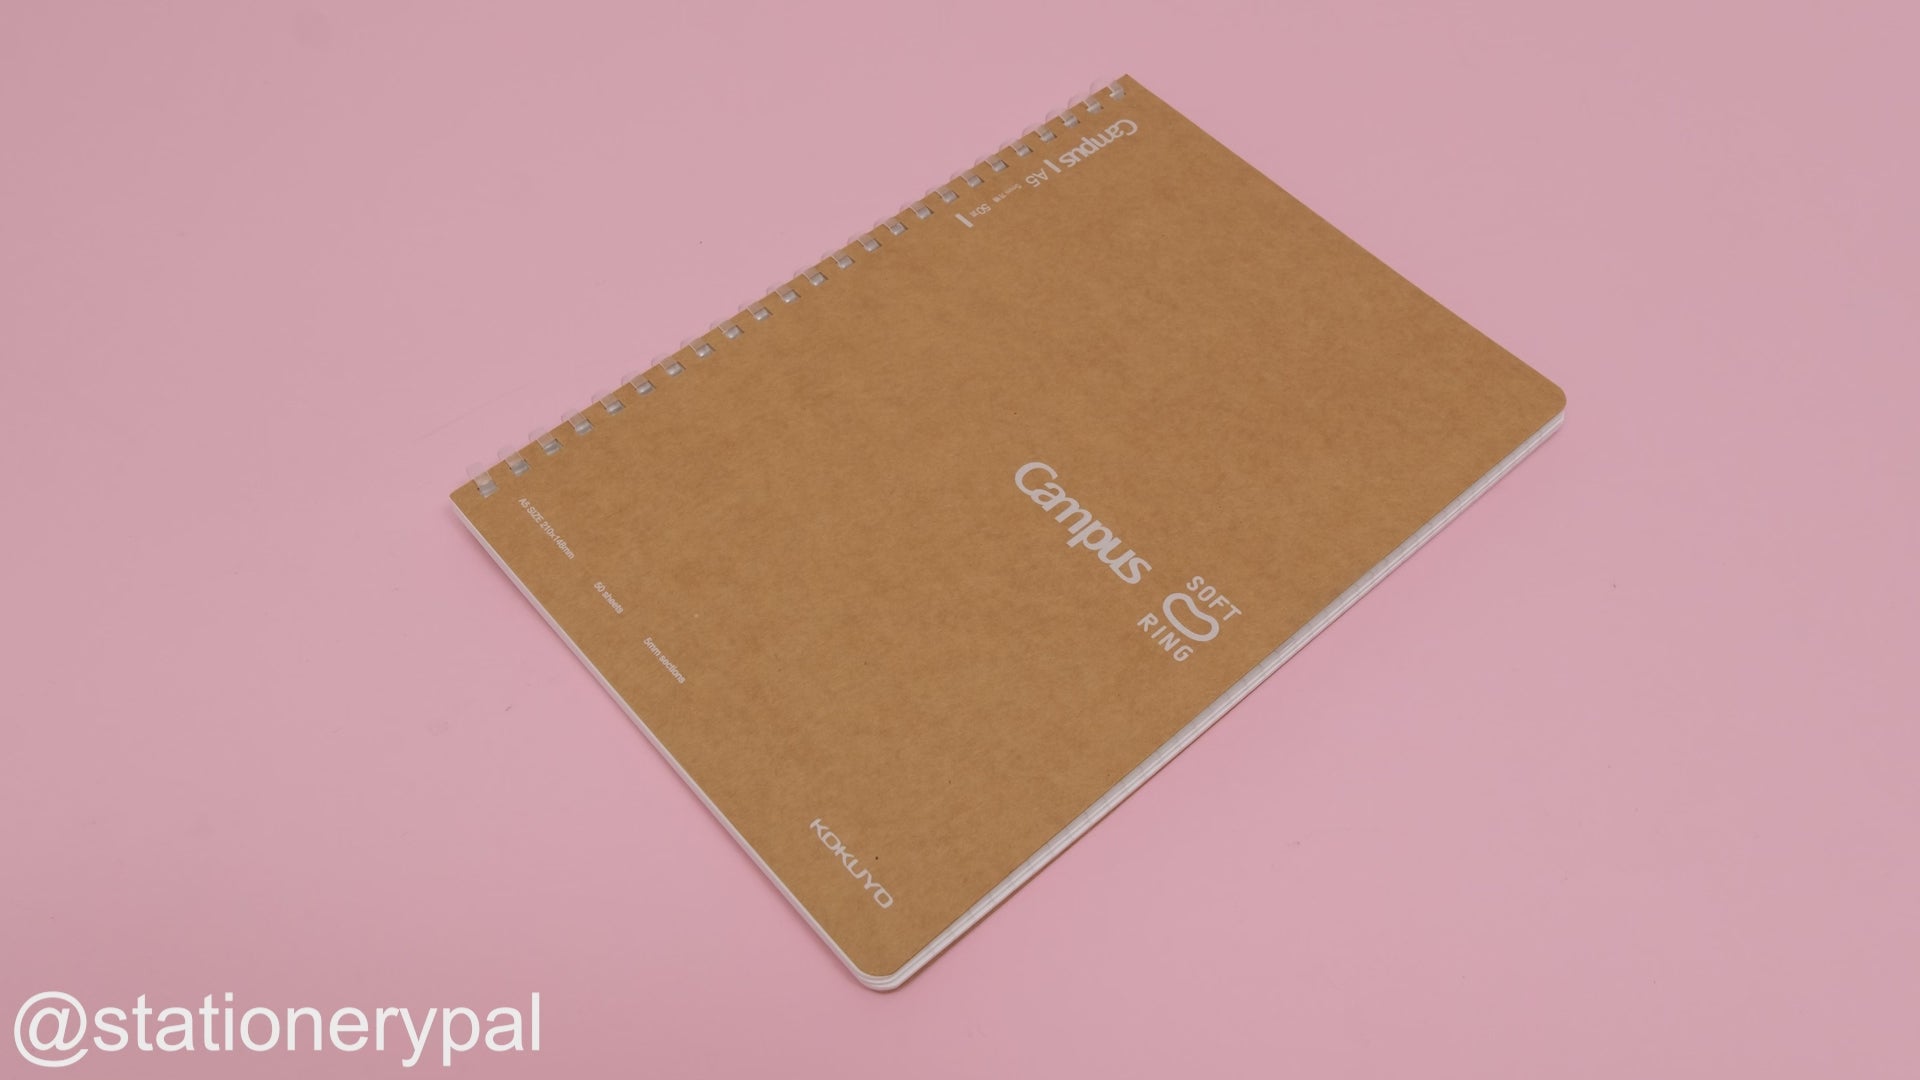 Kokuyo Campus Soft Ring Kraft Paper Cover Notebook - A5 - 5 mm Grid